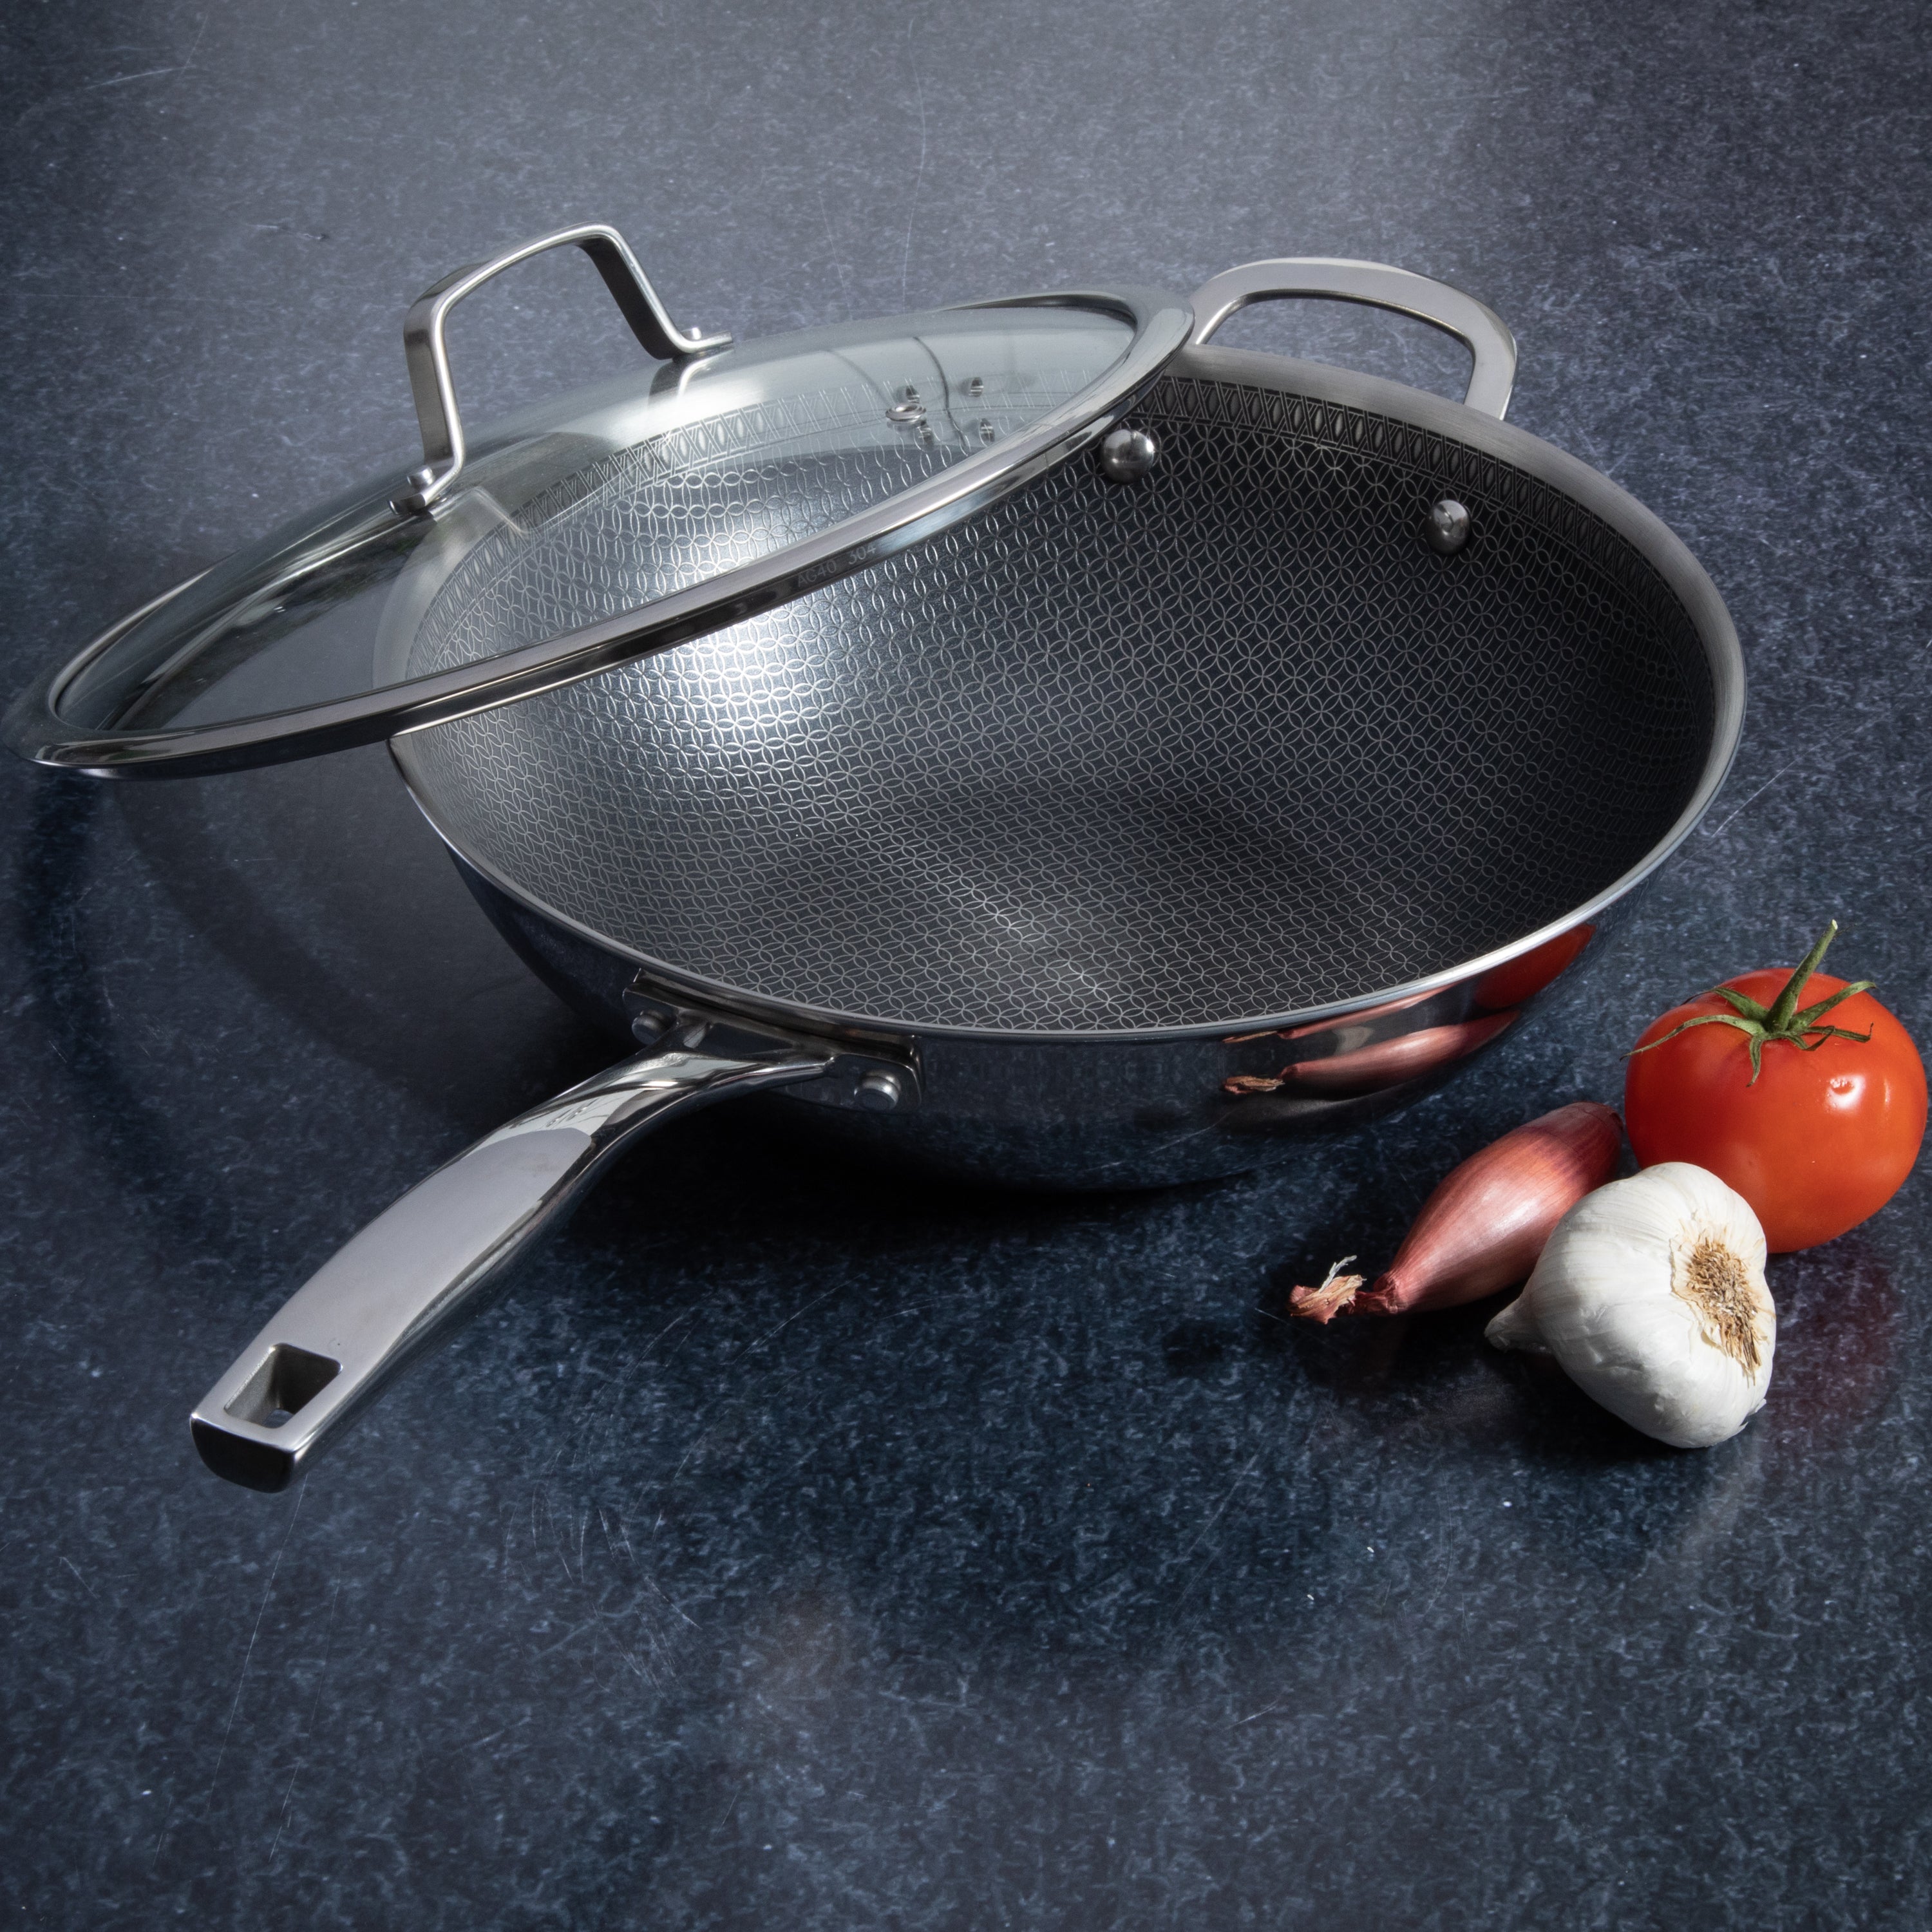 Tri-ply Stainless Steel Diamond Nonstick Frying Pan, 12 inch, 12